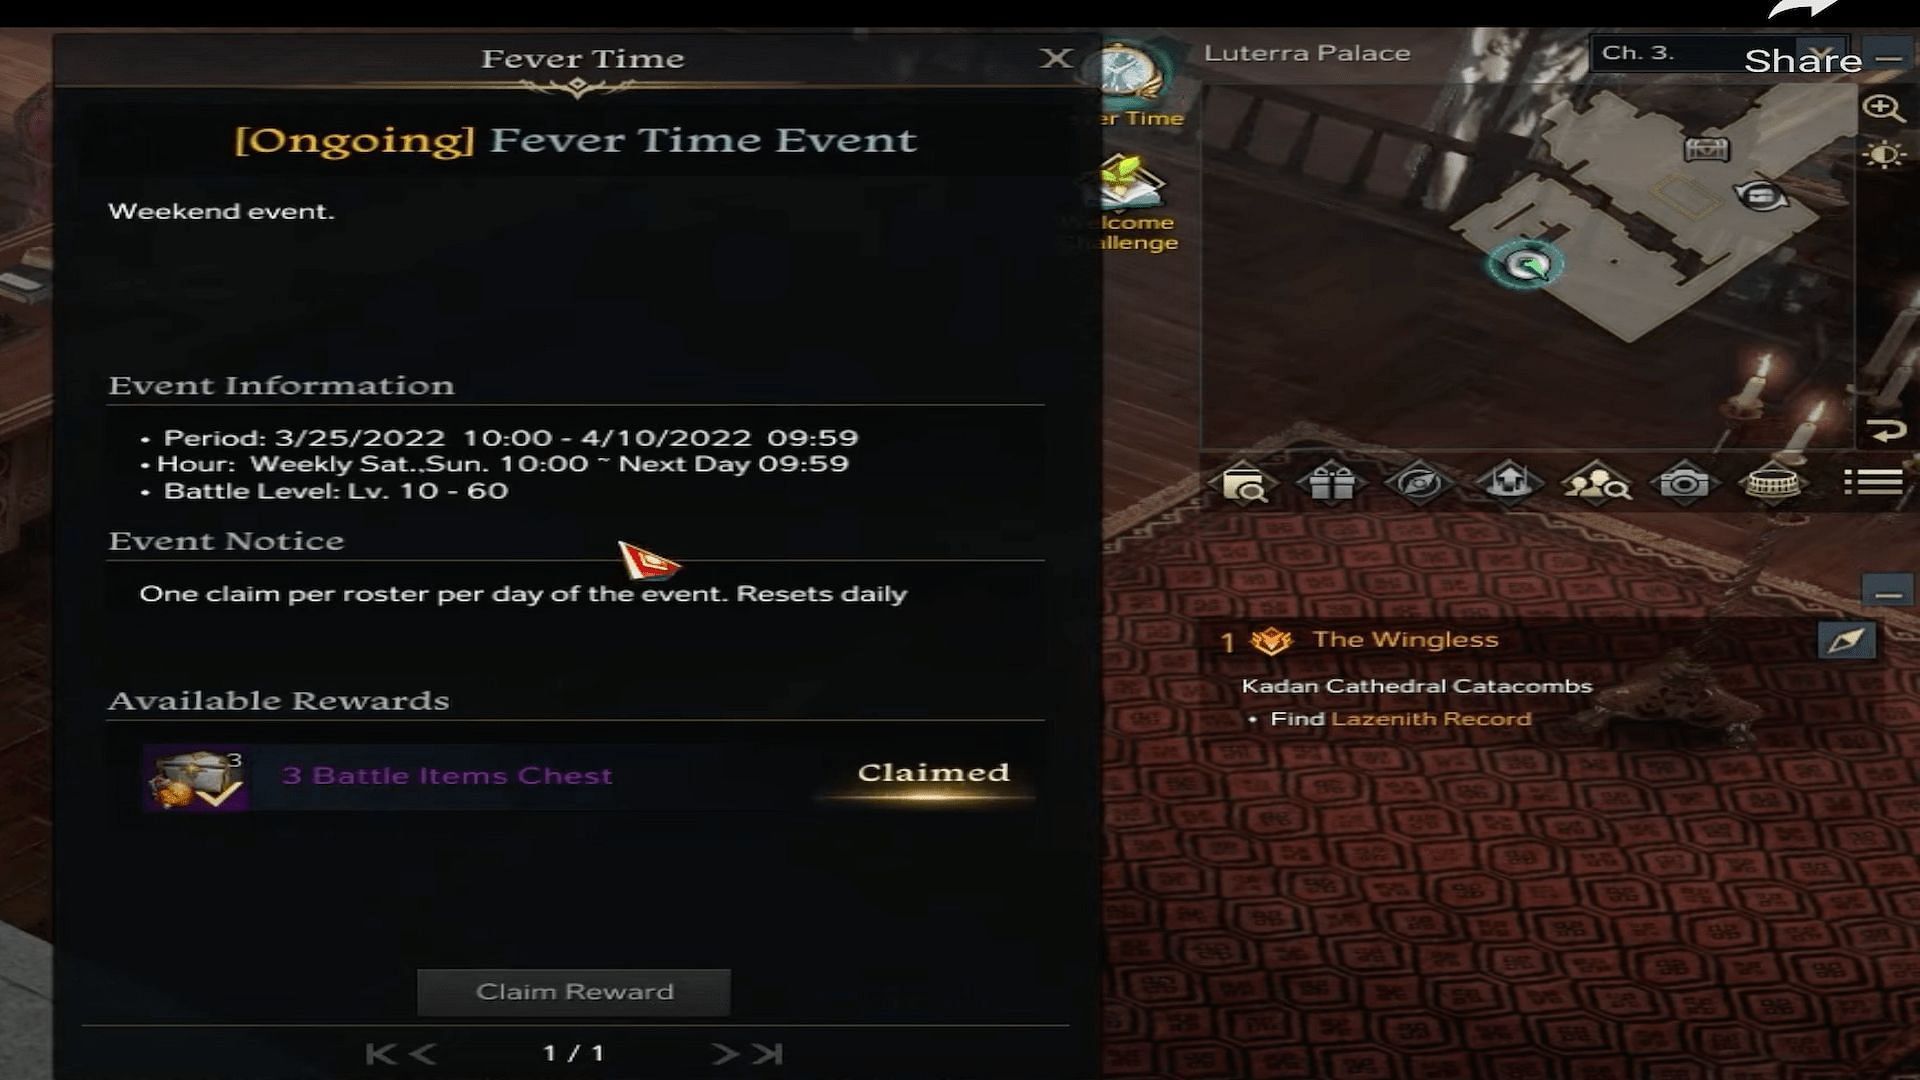 Players of Lost Ark can get special items during the Spring Fever Time event during the weekends in April (Image via Geek Spells/YouTube)